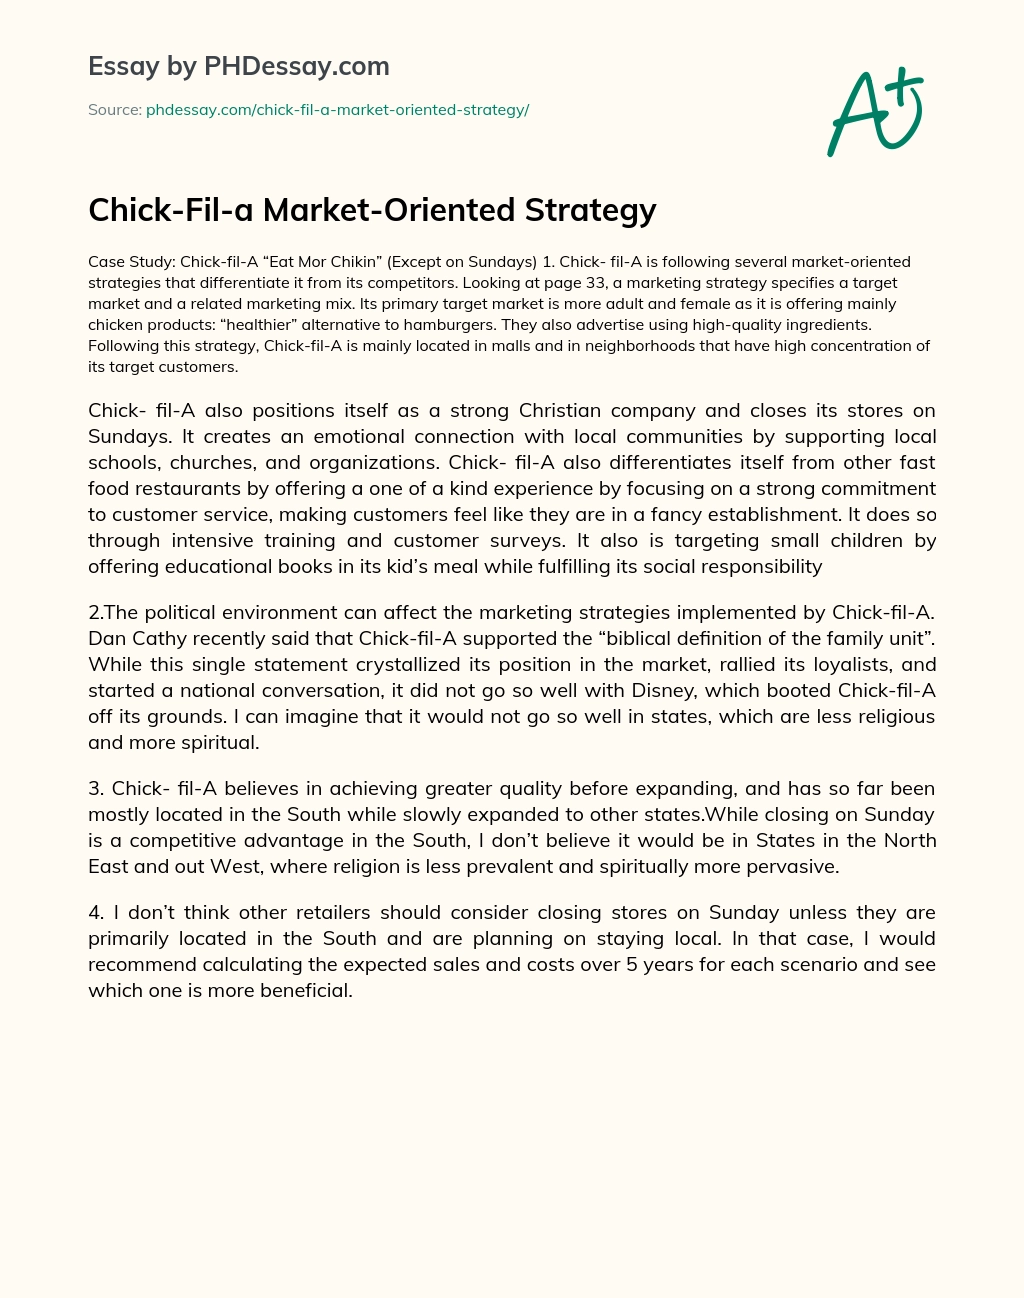 Chick-Fil-a Market-Oriented Strategy essay